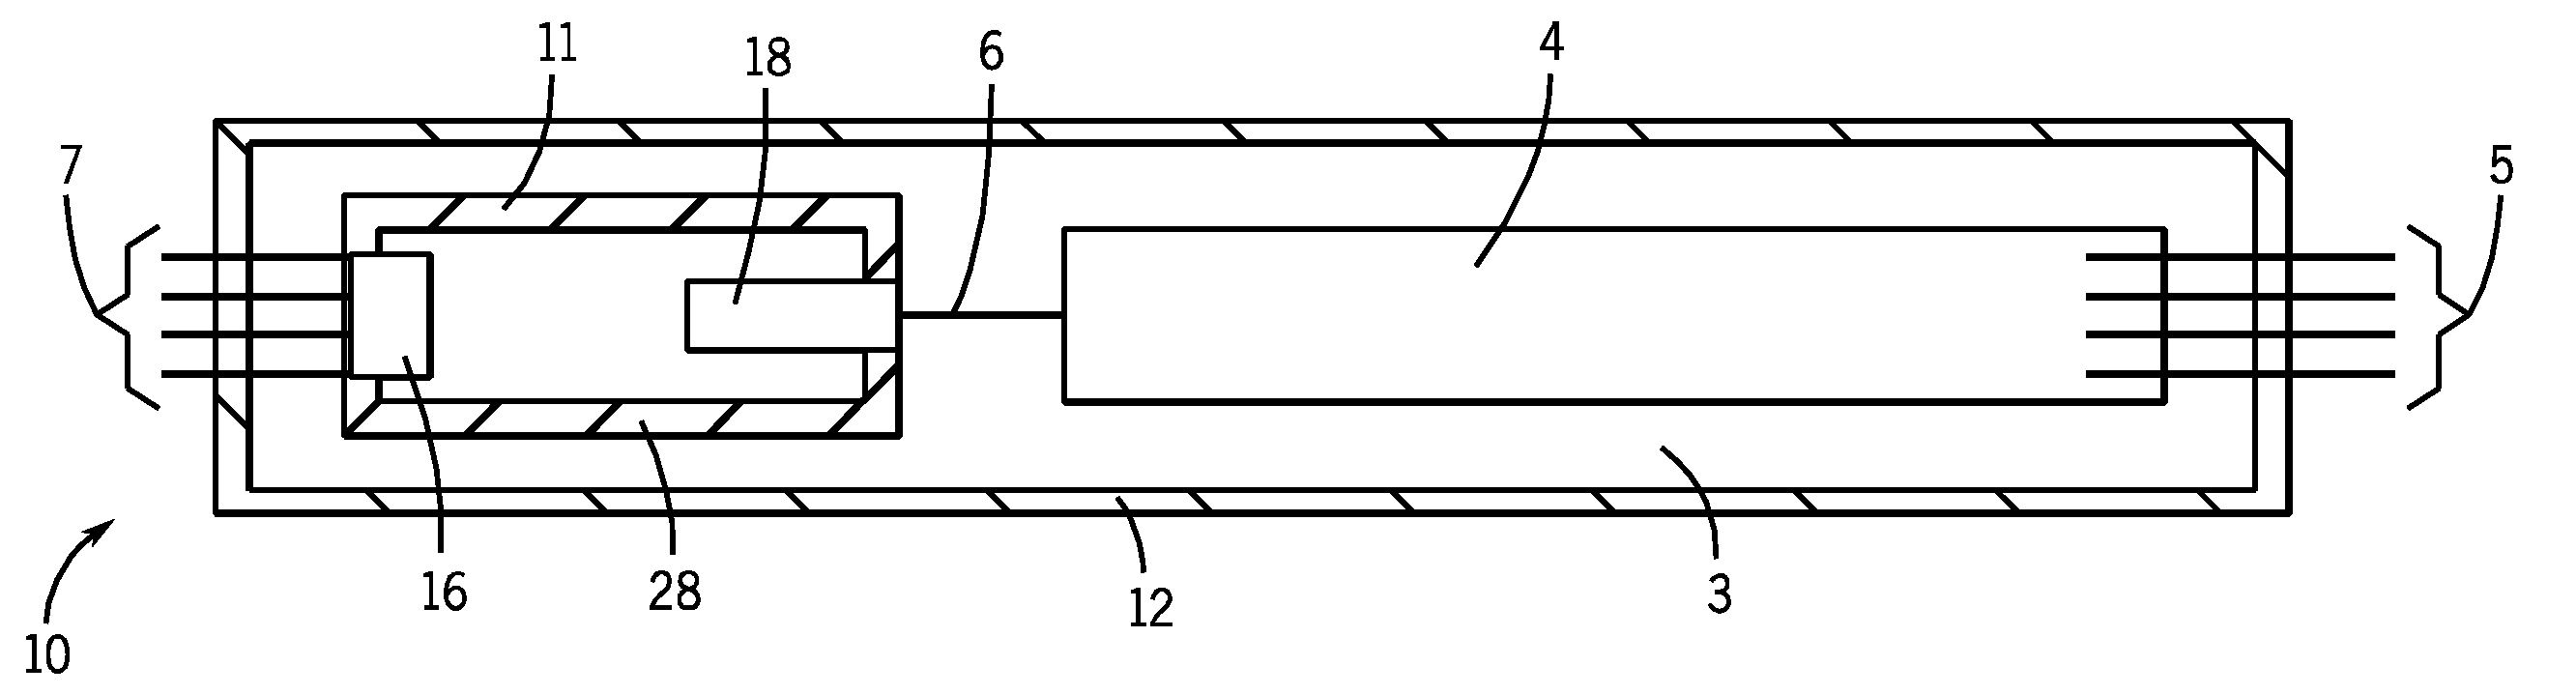 Floating Intermediate Electrode Configuration for Downhole Nuclear Radiation Generator